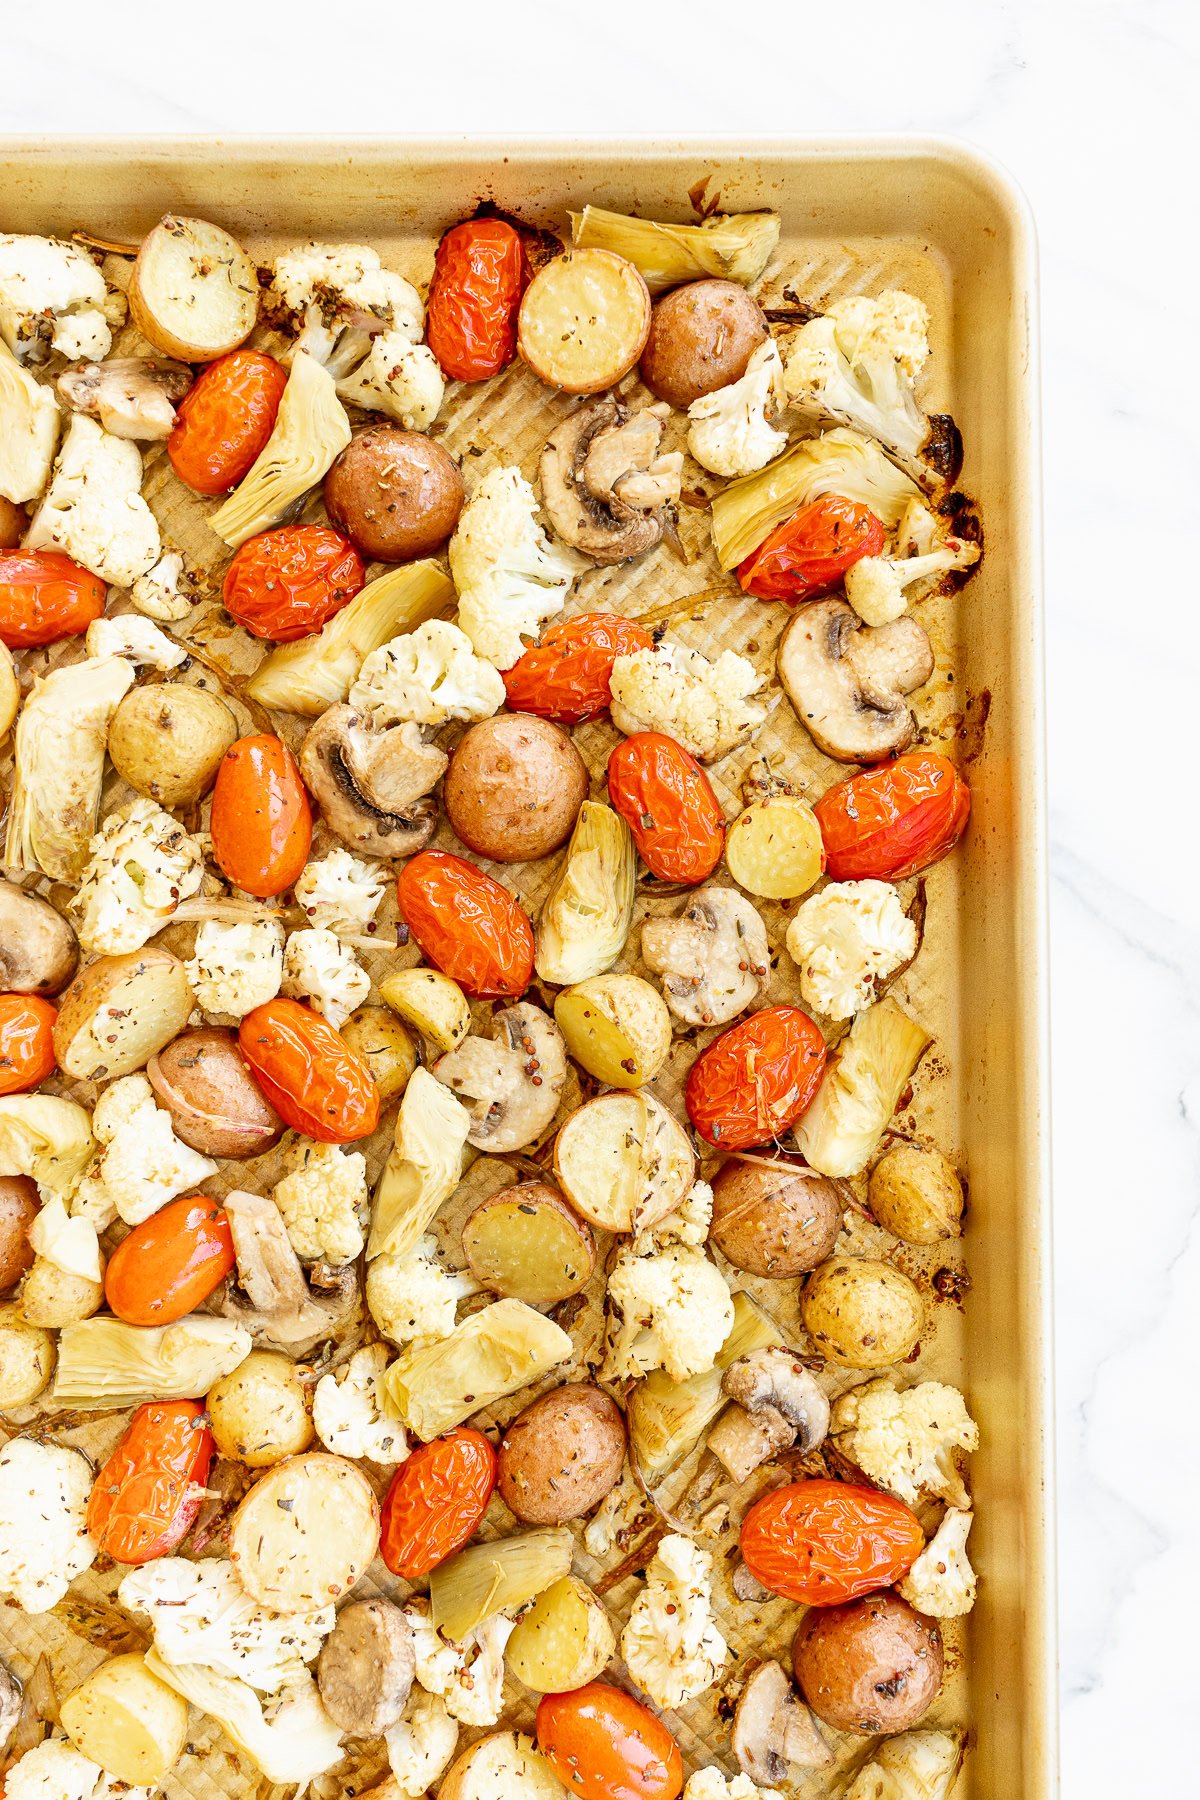 Roasted Italian vegetables and sausages on a baking sheet, including cauliflower, tomatoes, mushrooms, and artichokes.